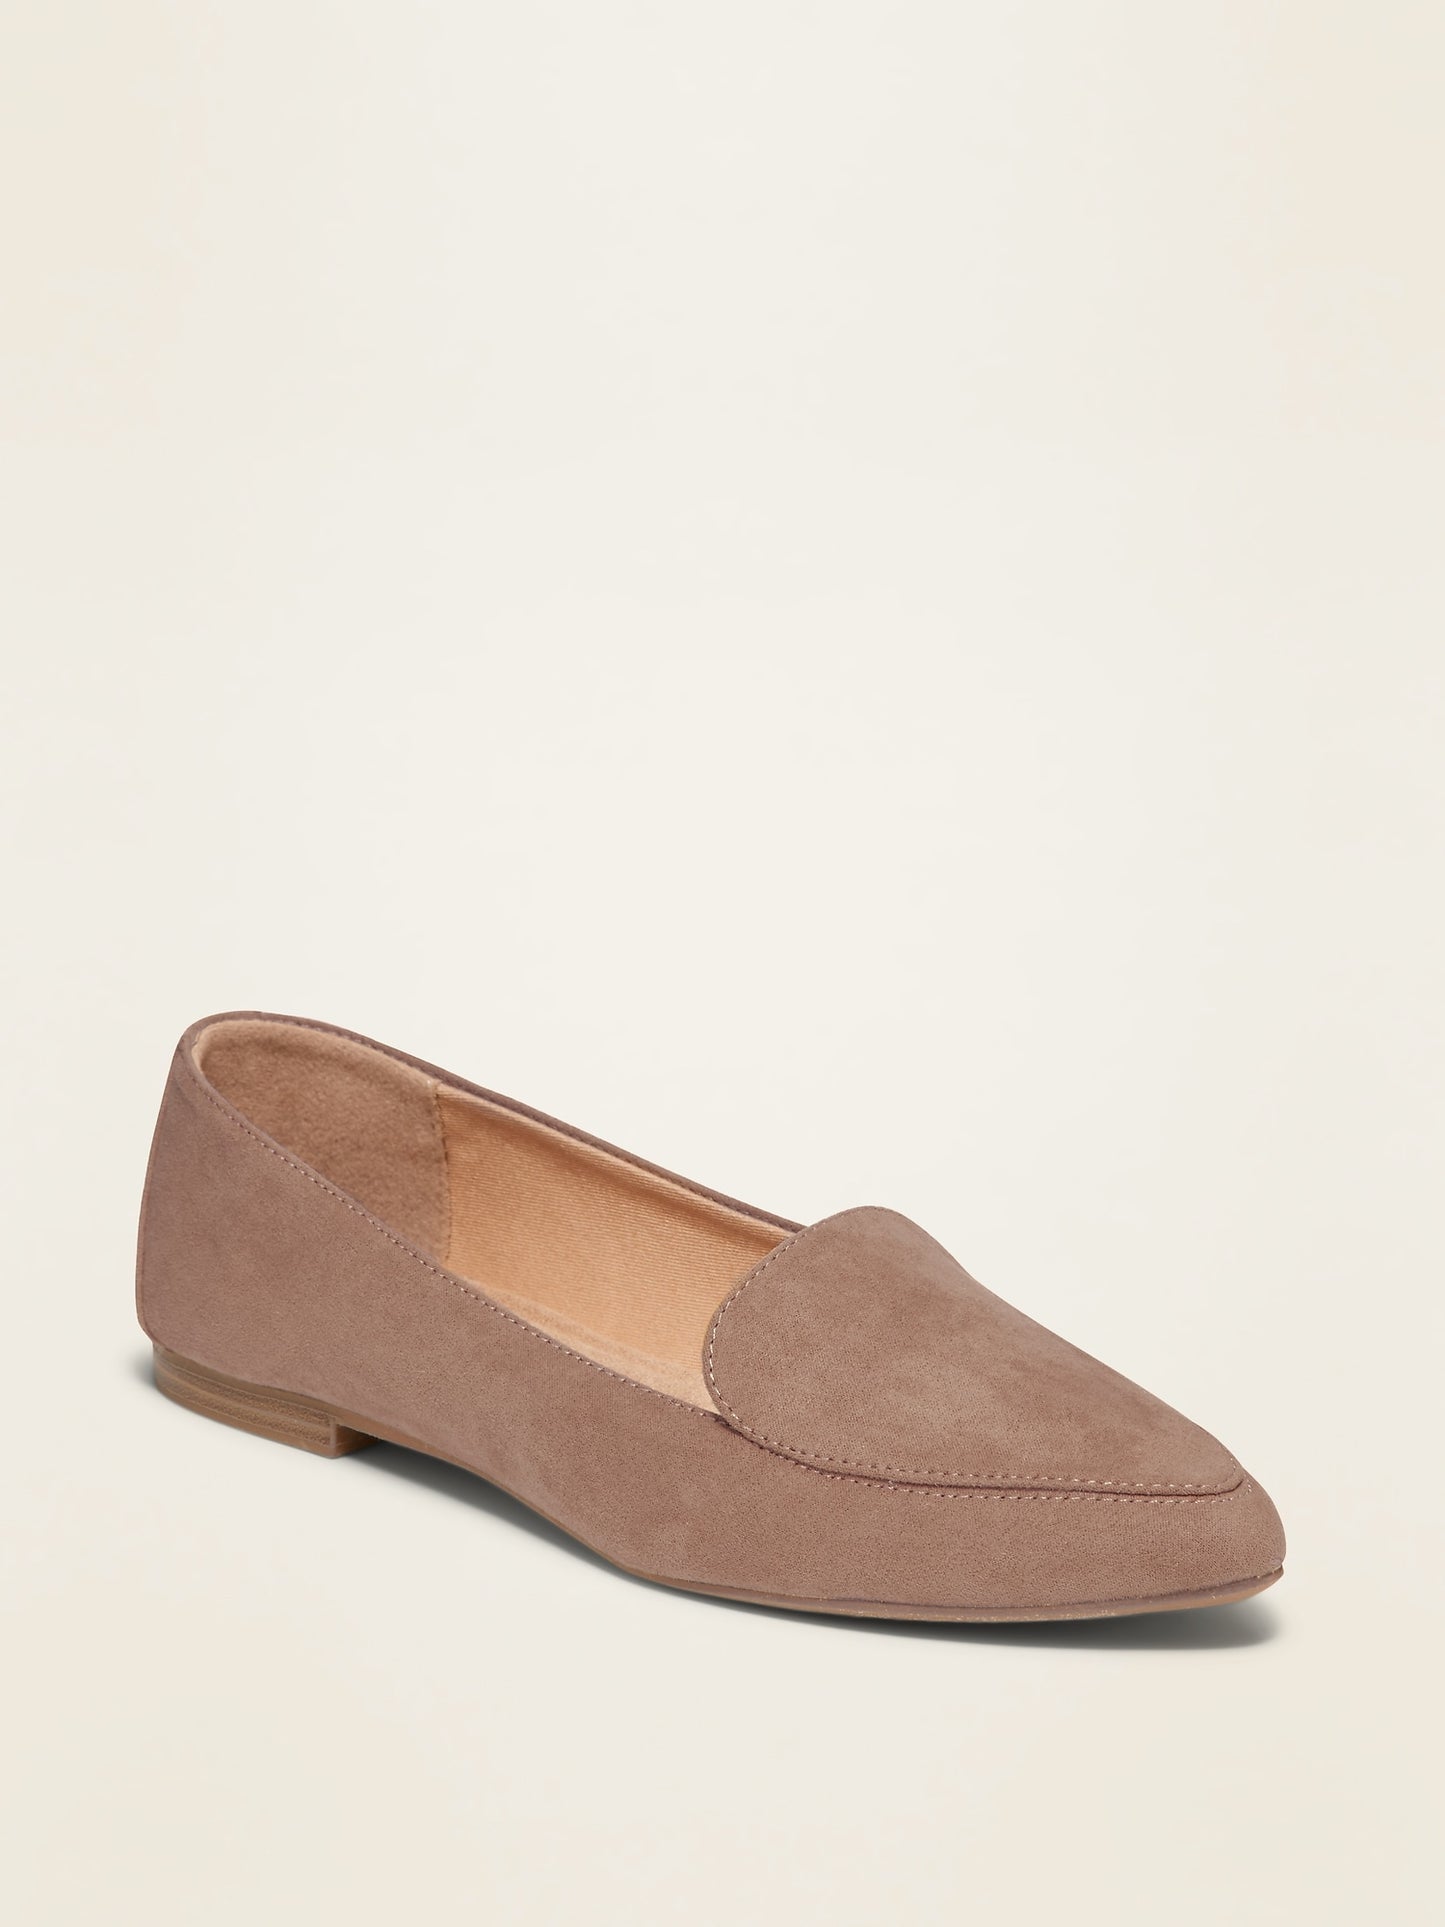 ON Faux-Suede Pointy-Toe Loafers For Women - Taupe